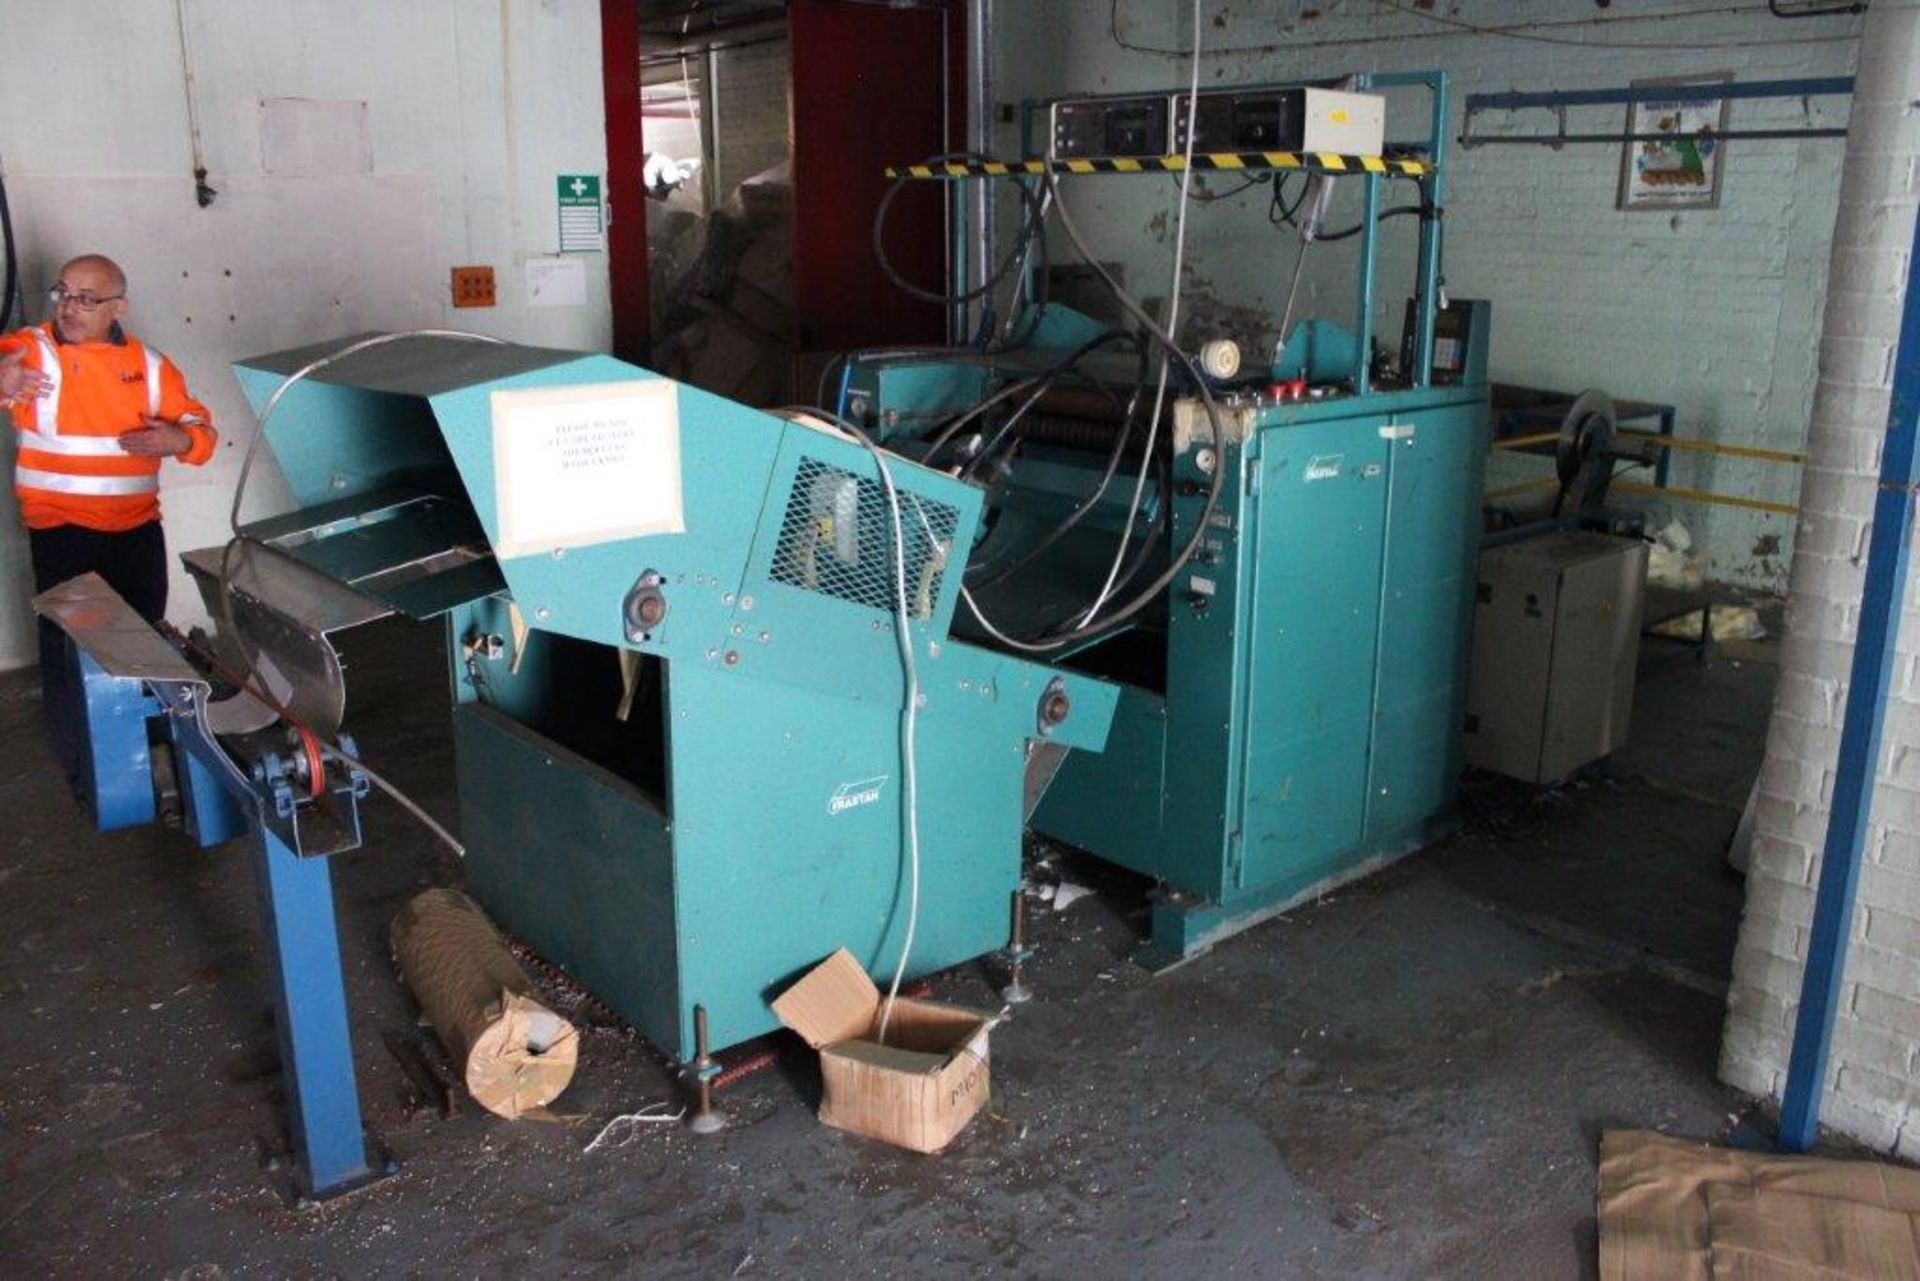 Frestan rolloing machine, takes vinea as proviously cut and rolls it ready for retail sale - Image 2 of 3